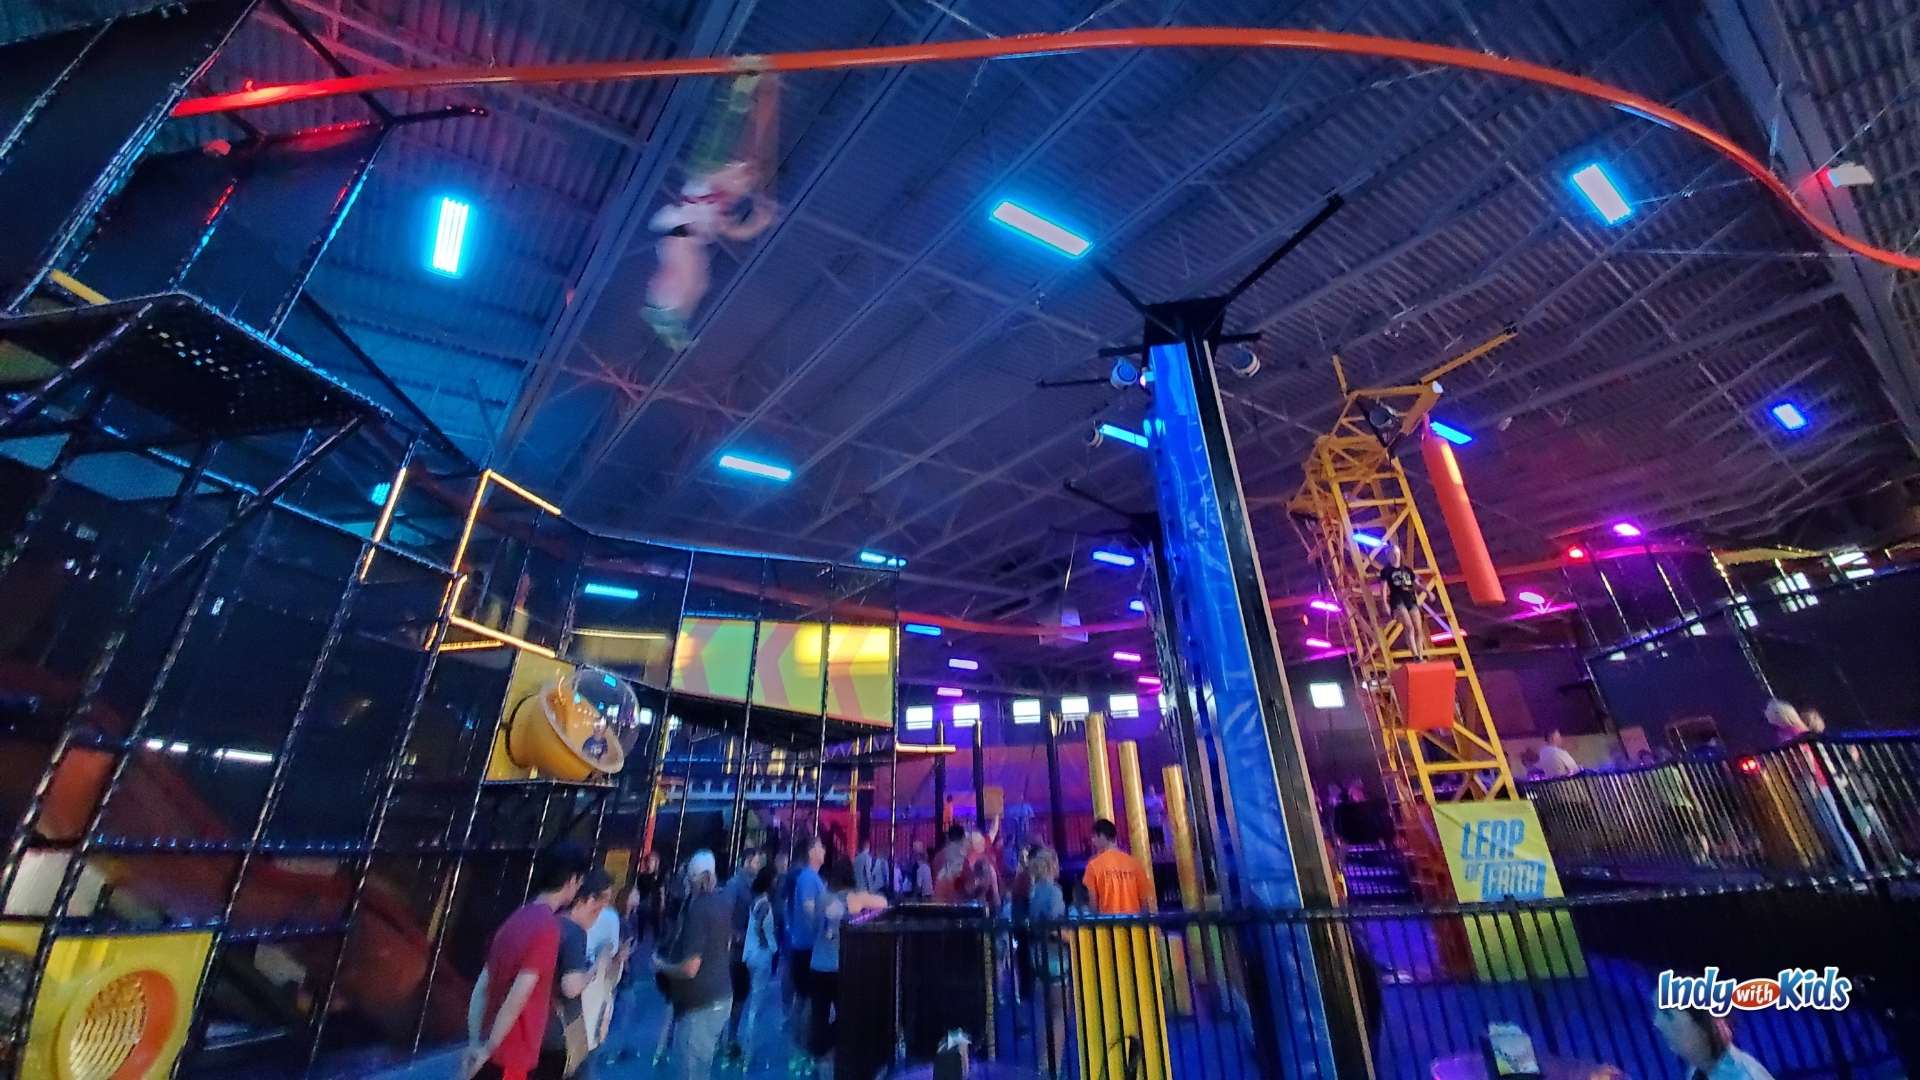 Experience Gifts for Kids in Indianapolis: Have a day of adventure at an indoor play place.